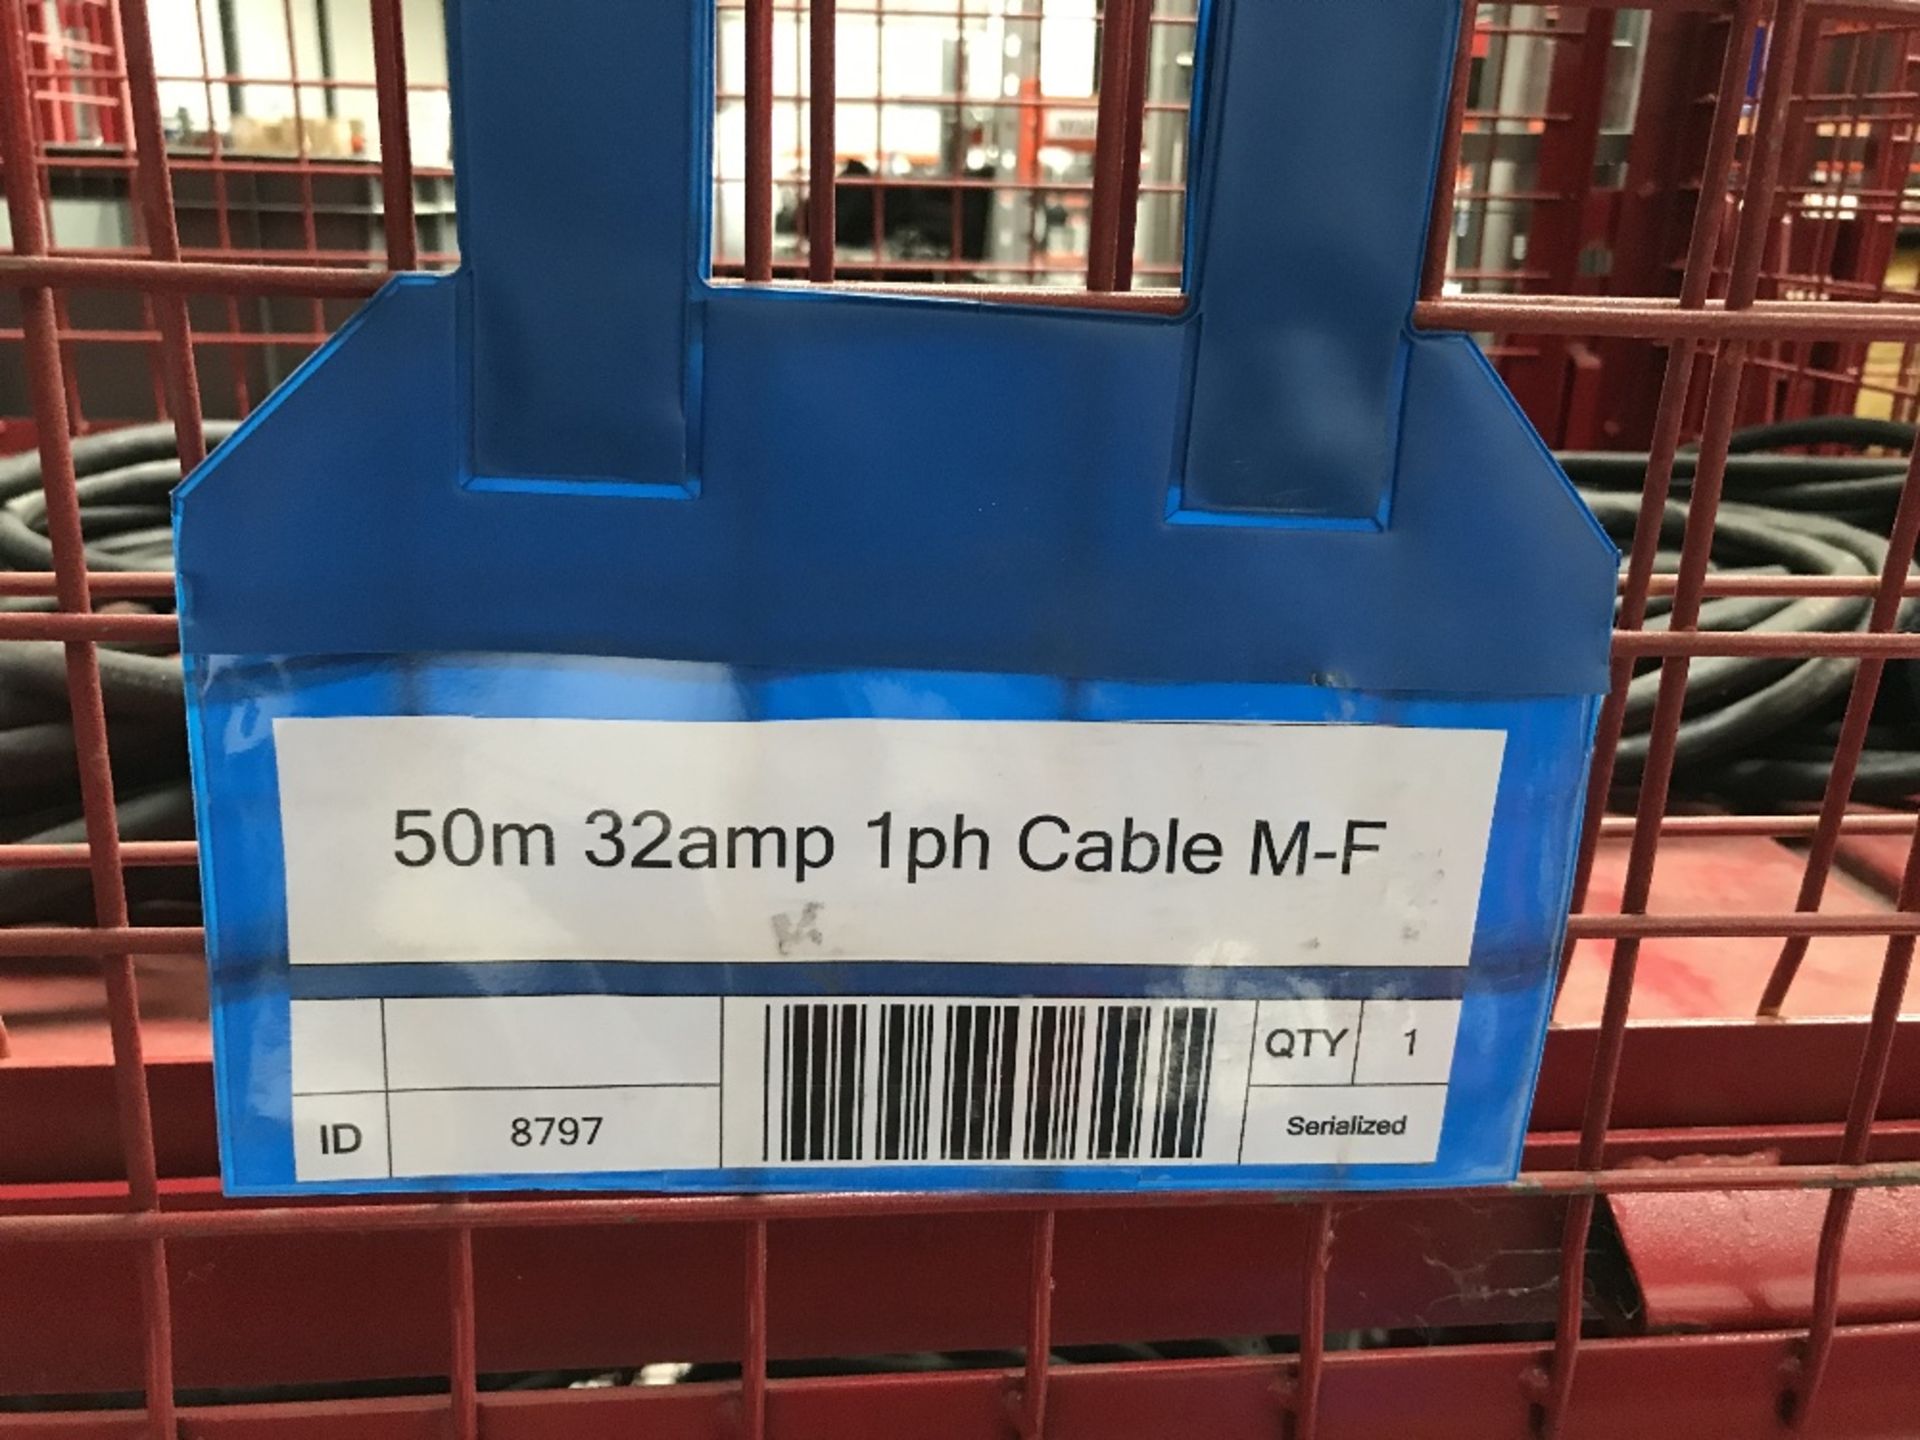 50m 32amp 1ph Cable M-F with Steel Fabricated Stillage - Image 2 of 2